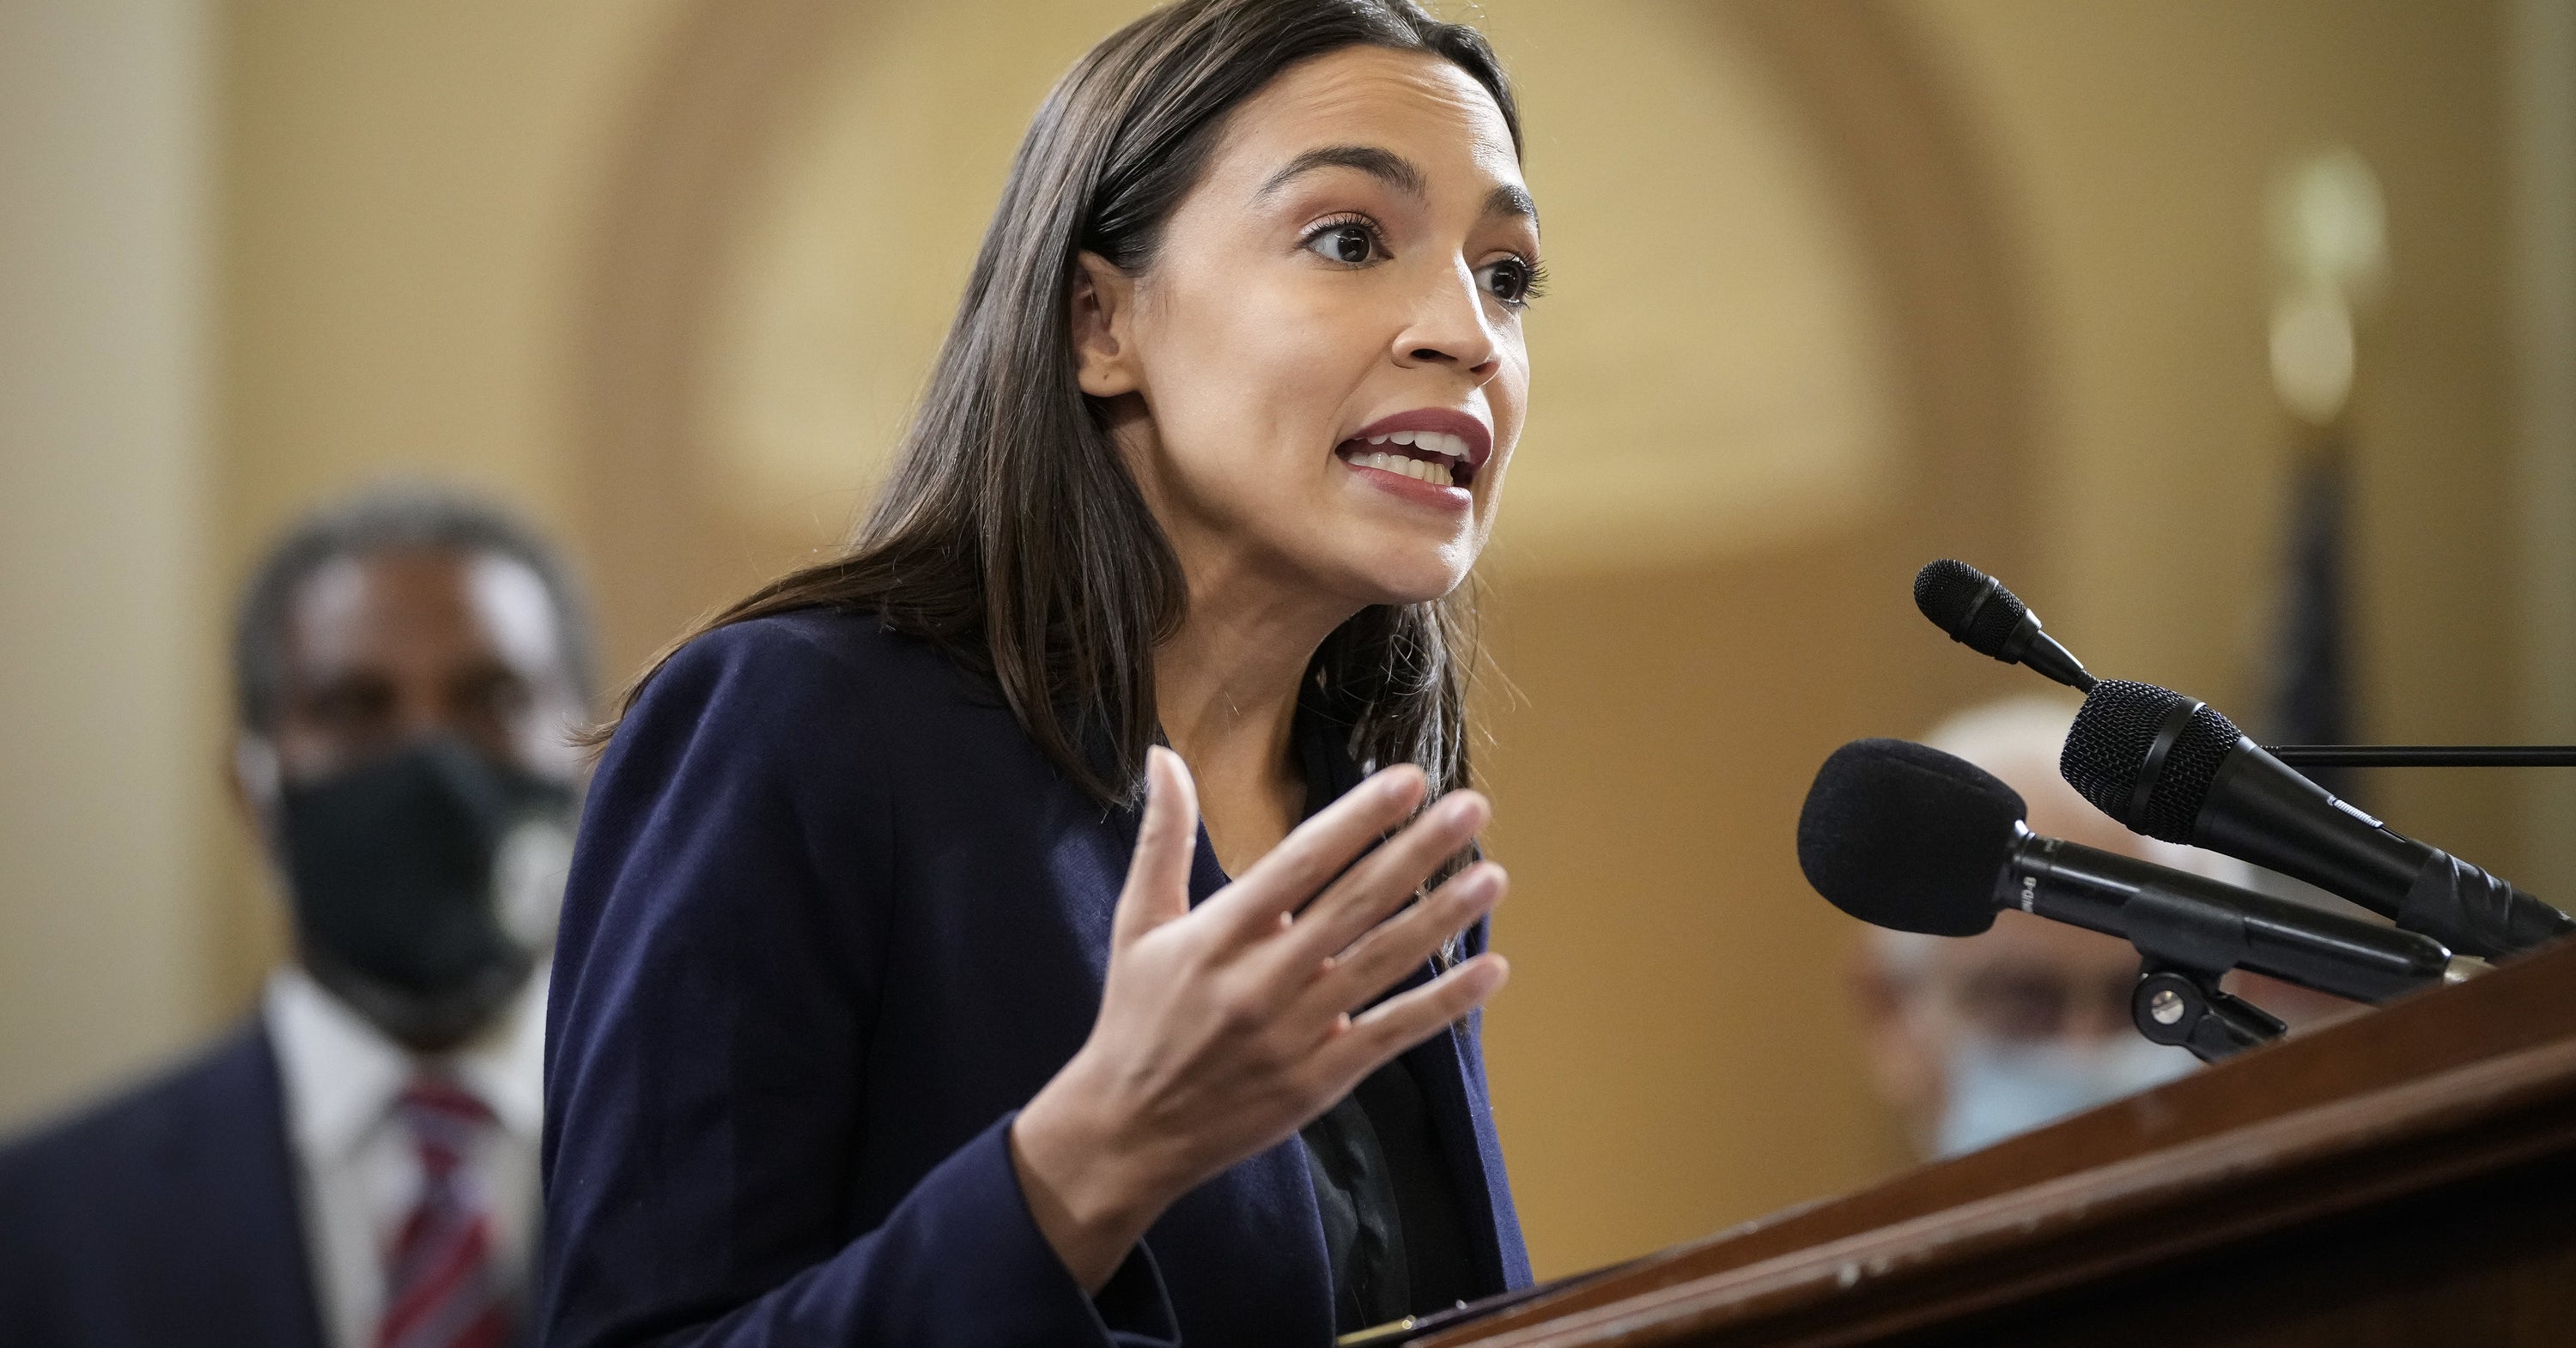 AOC And Other Members Of Congress Called Out Big Oil’s Climate BS In A Historic Hearing - BuzzFeed News